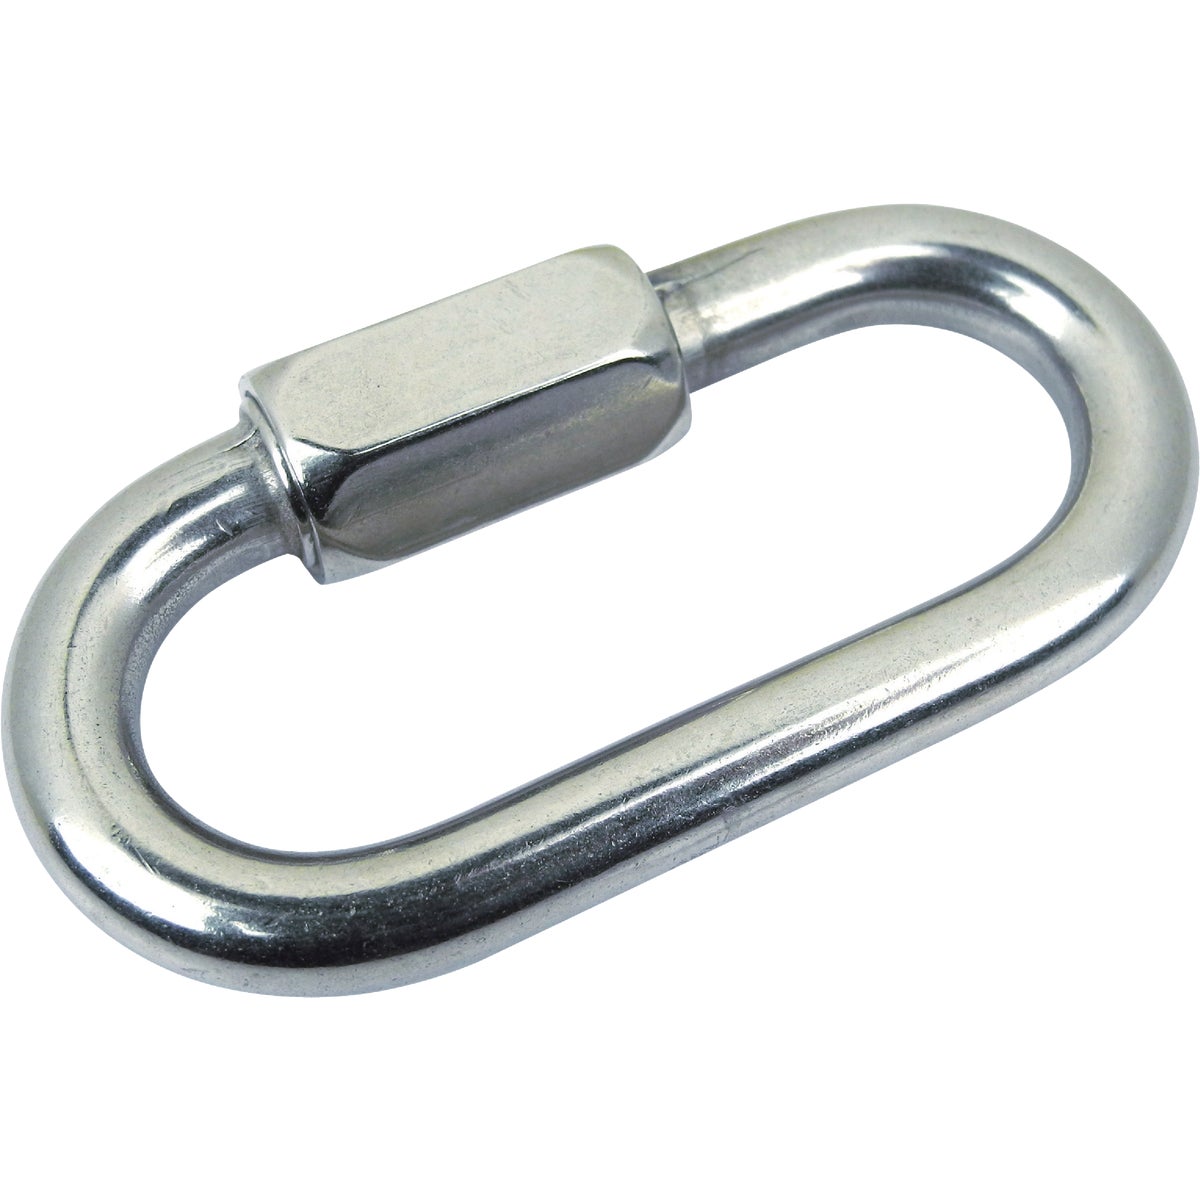 Seachoice 1/4 In. x 2-1/4 In. Stainless Steel Quick Link